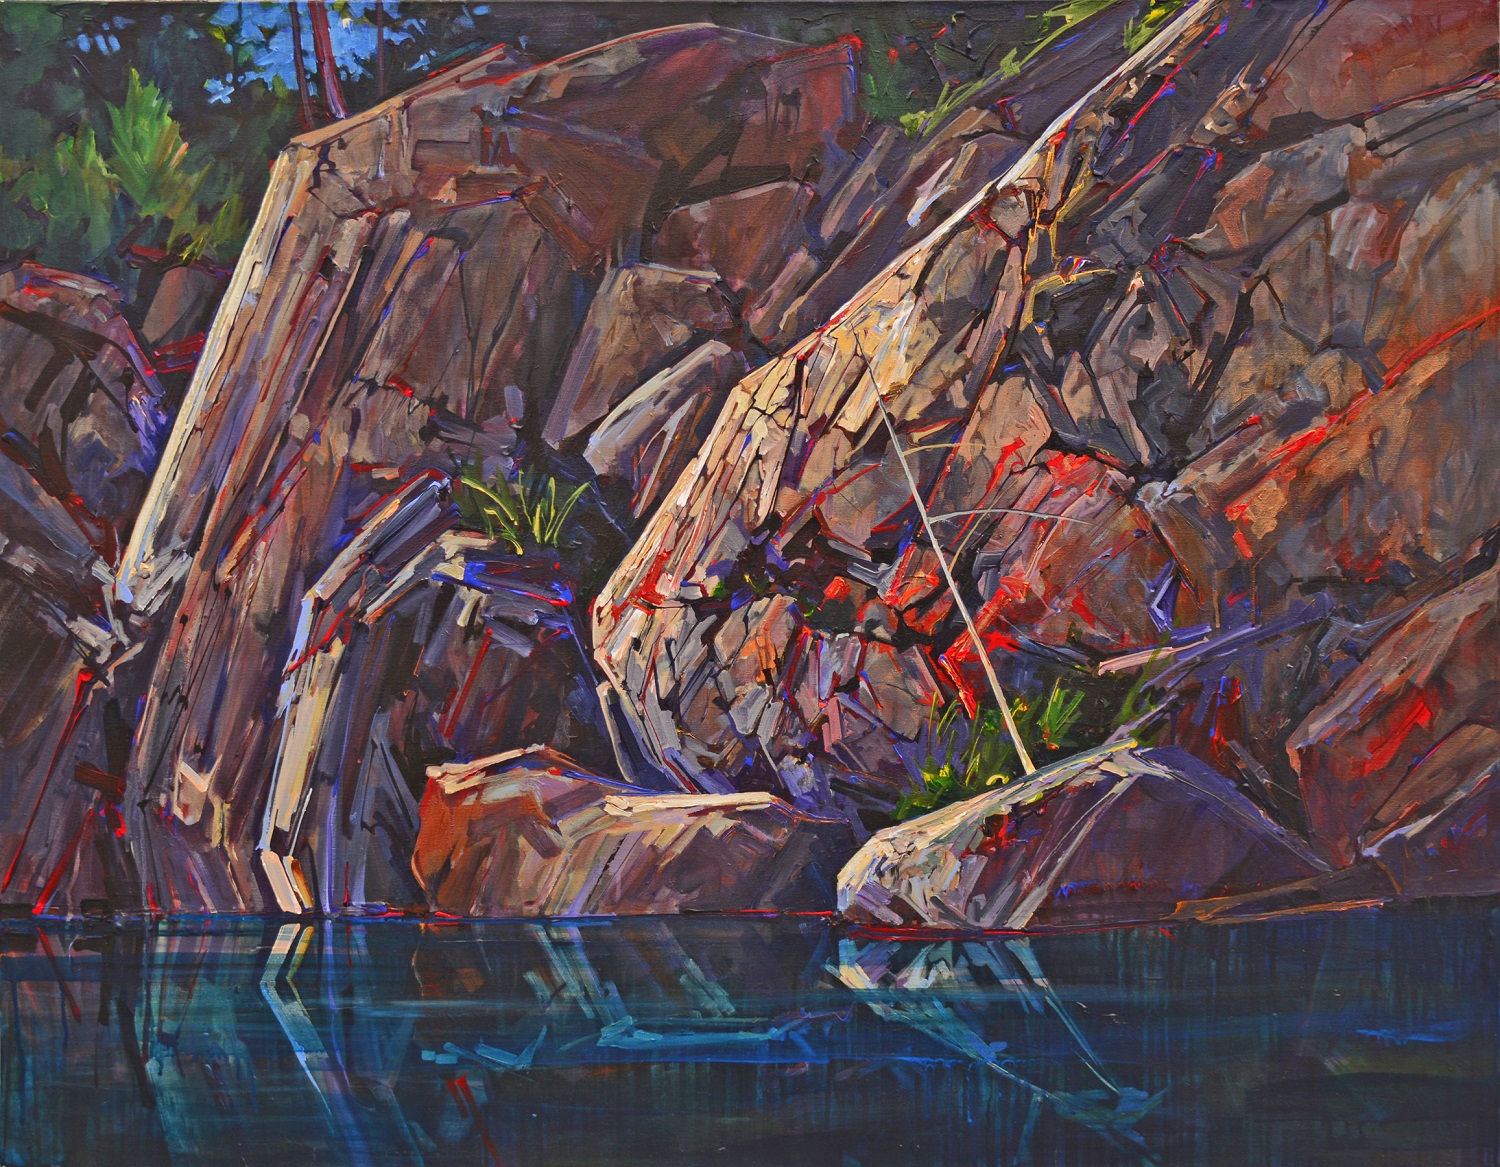 A painting of a rock face